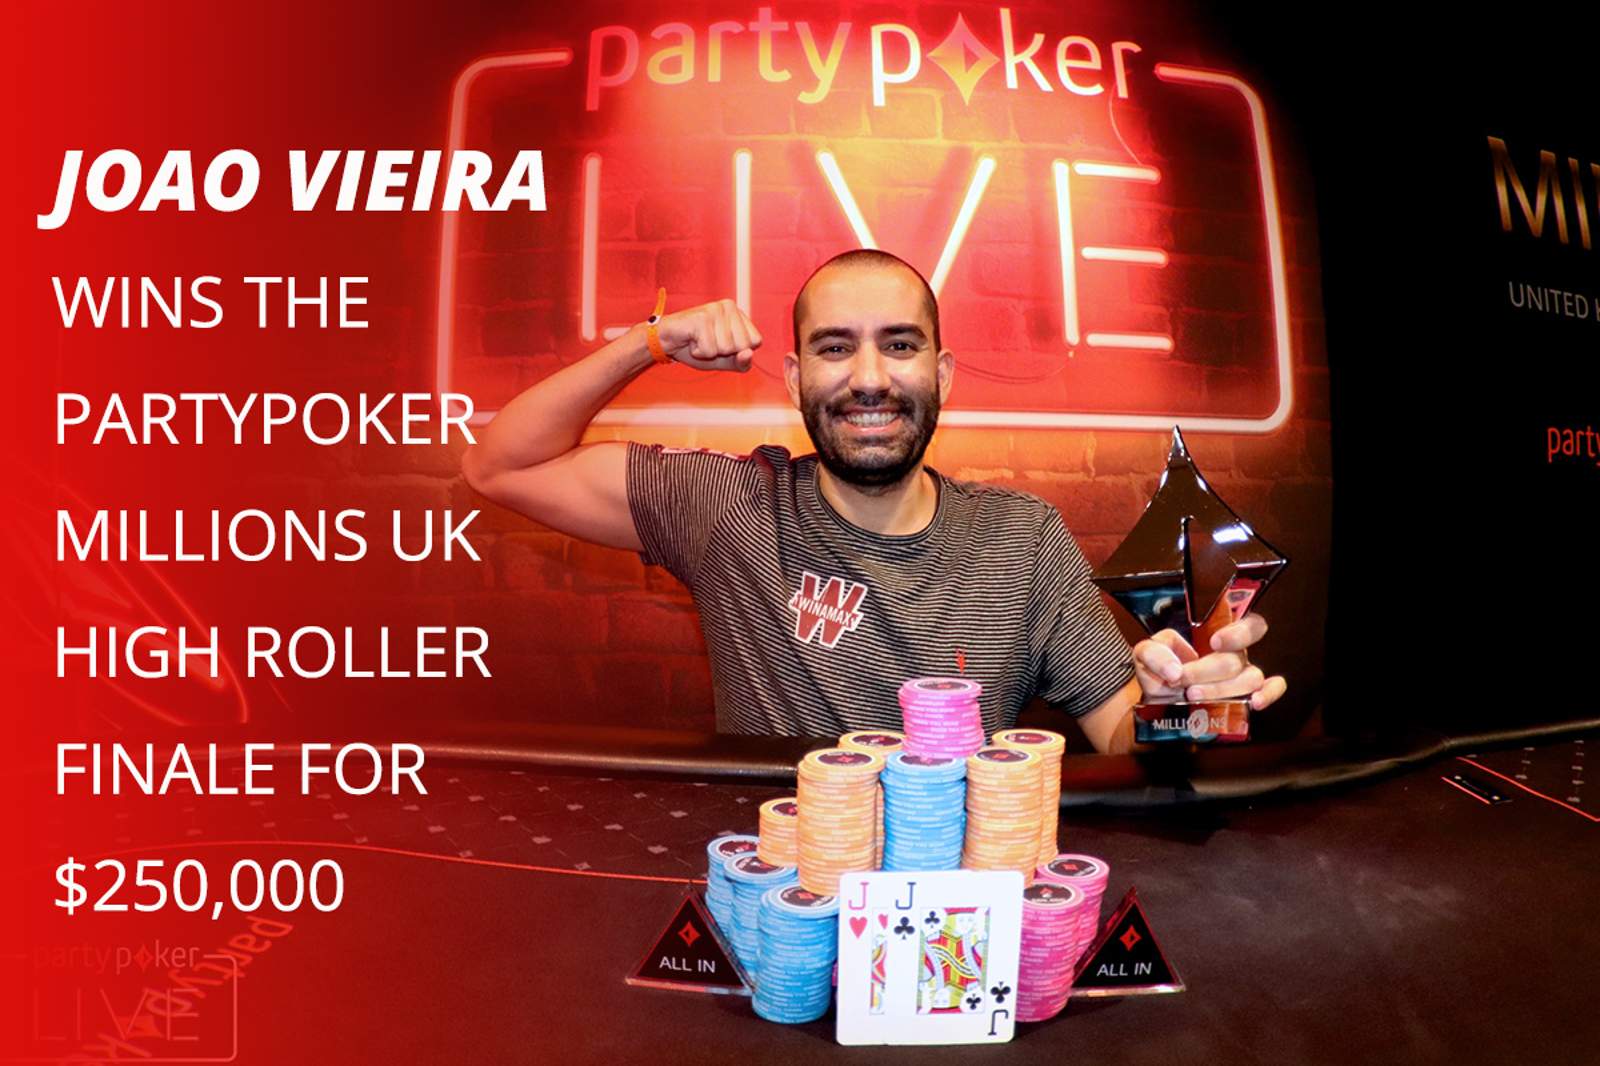 Joao Vieira Wins the partypoker MILLIONS UK High Roller Finale for $250,000